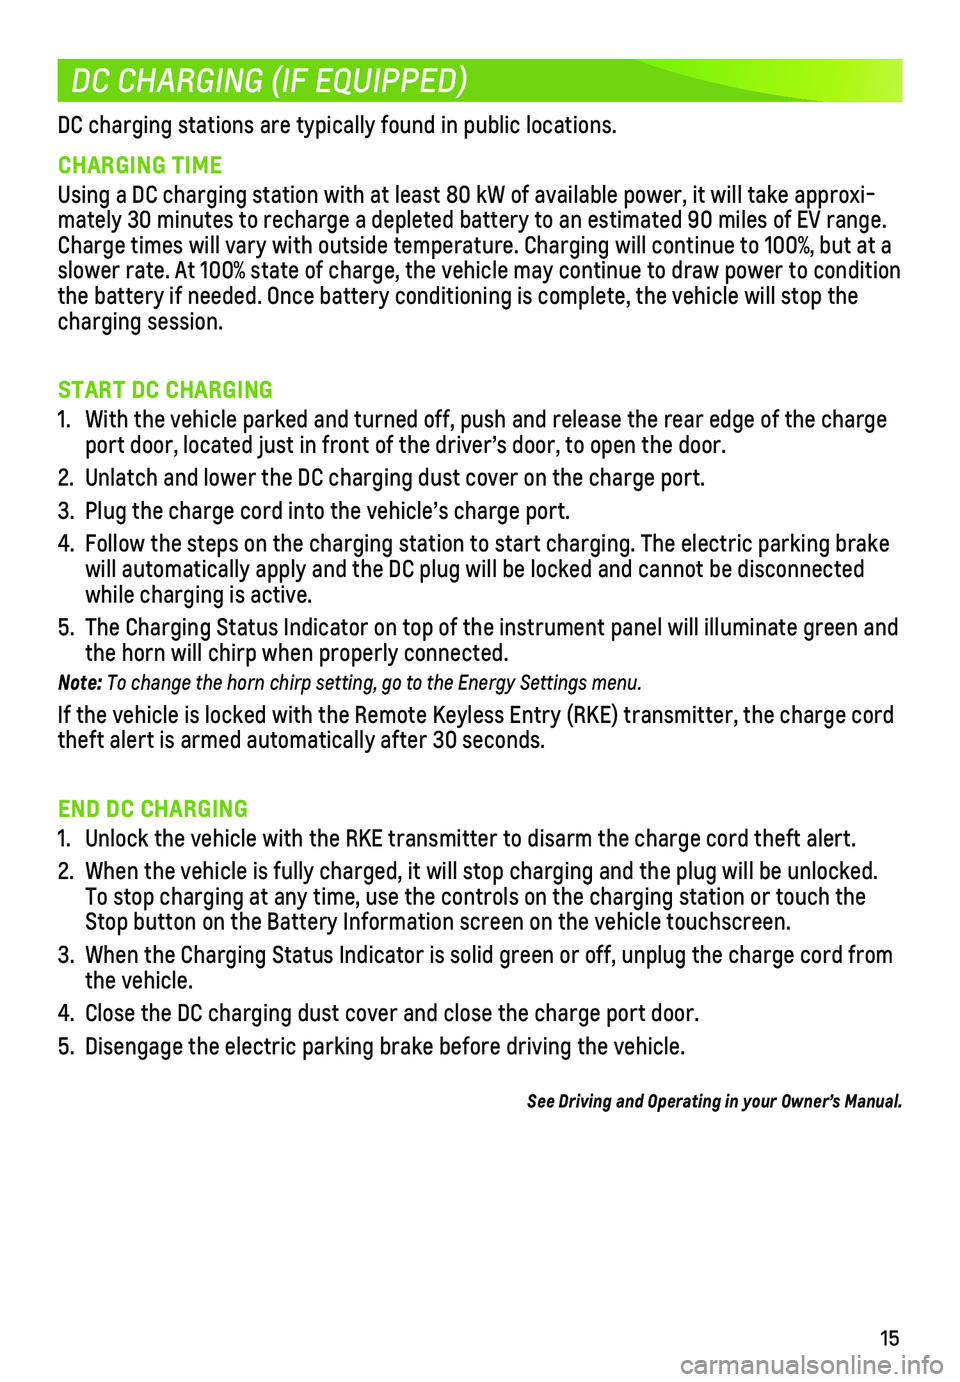 CHEVROLET BOLT EV 2018  Get To Know Guide 15
DC CHARGING (IF EQUIPPED)
DC charging stations are typically found in public locations.
CHARGING TIME
Using a DC charging station with at least 80 kW of available power, it w\
ill take approxi-mate